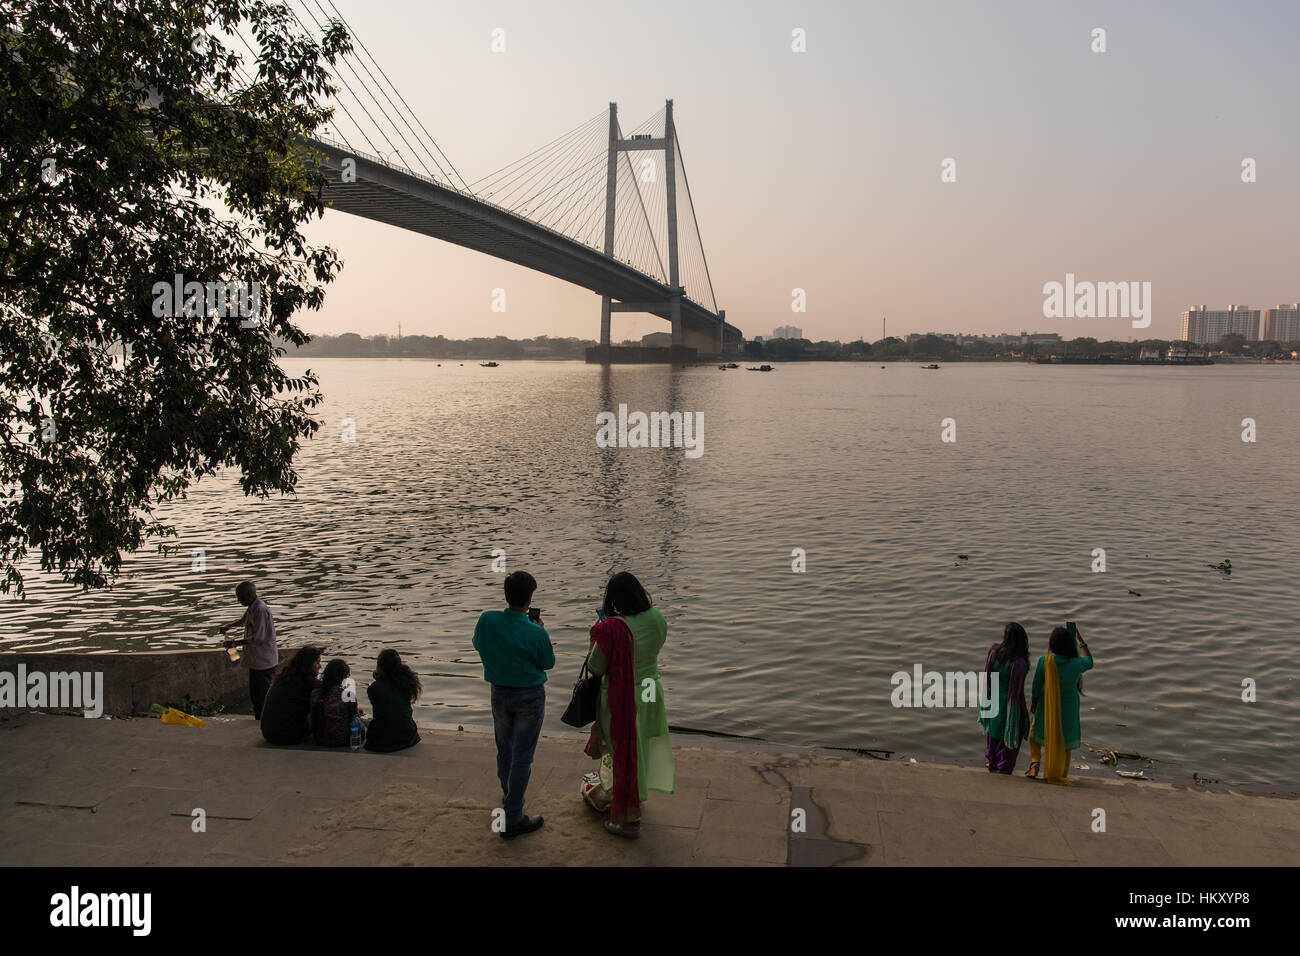 Il Hooghly ponte sopra il Fiume Hooghly in Kolkata (Calcutta), West Bengal, India. Foto Stock